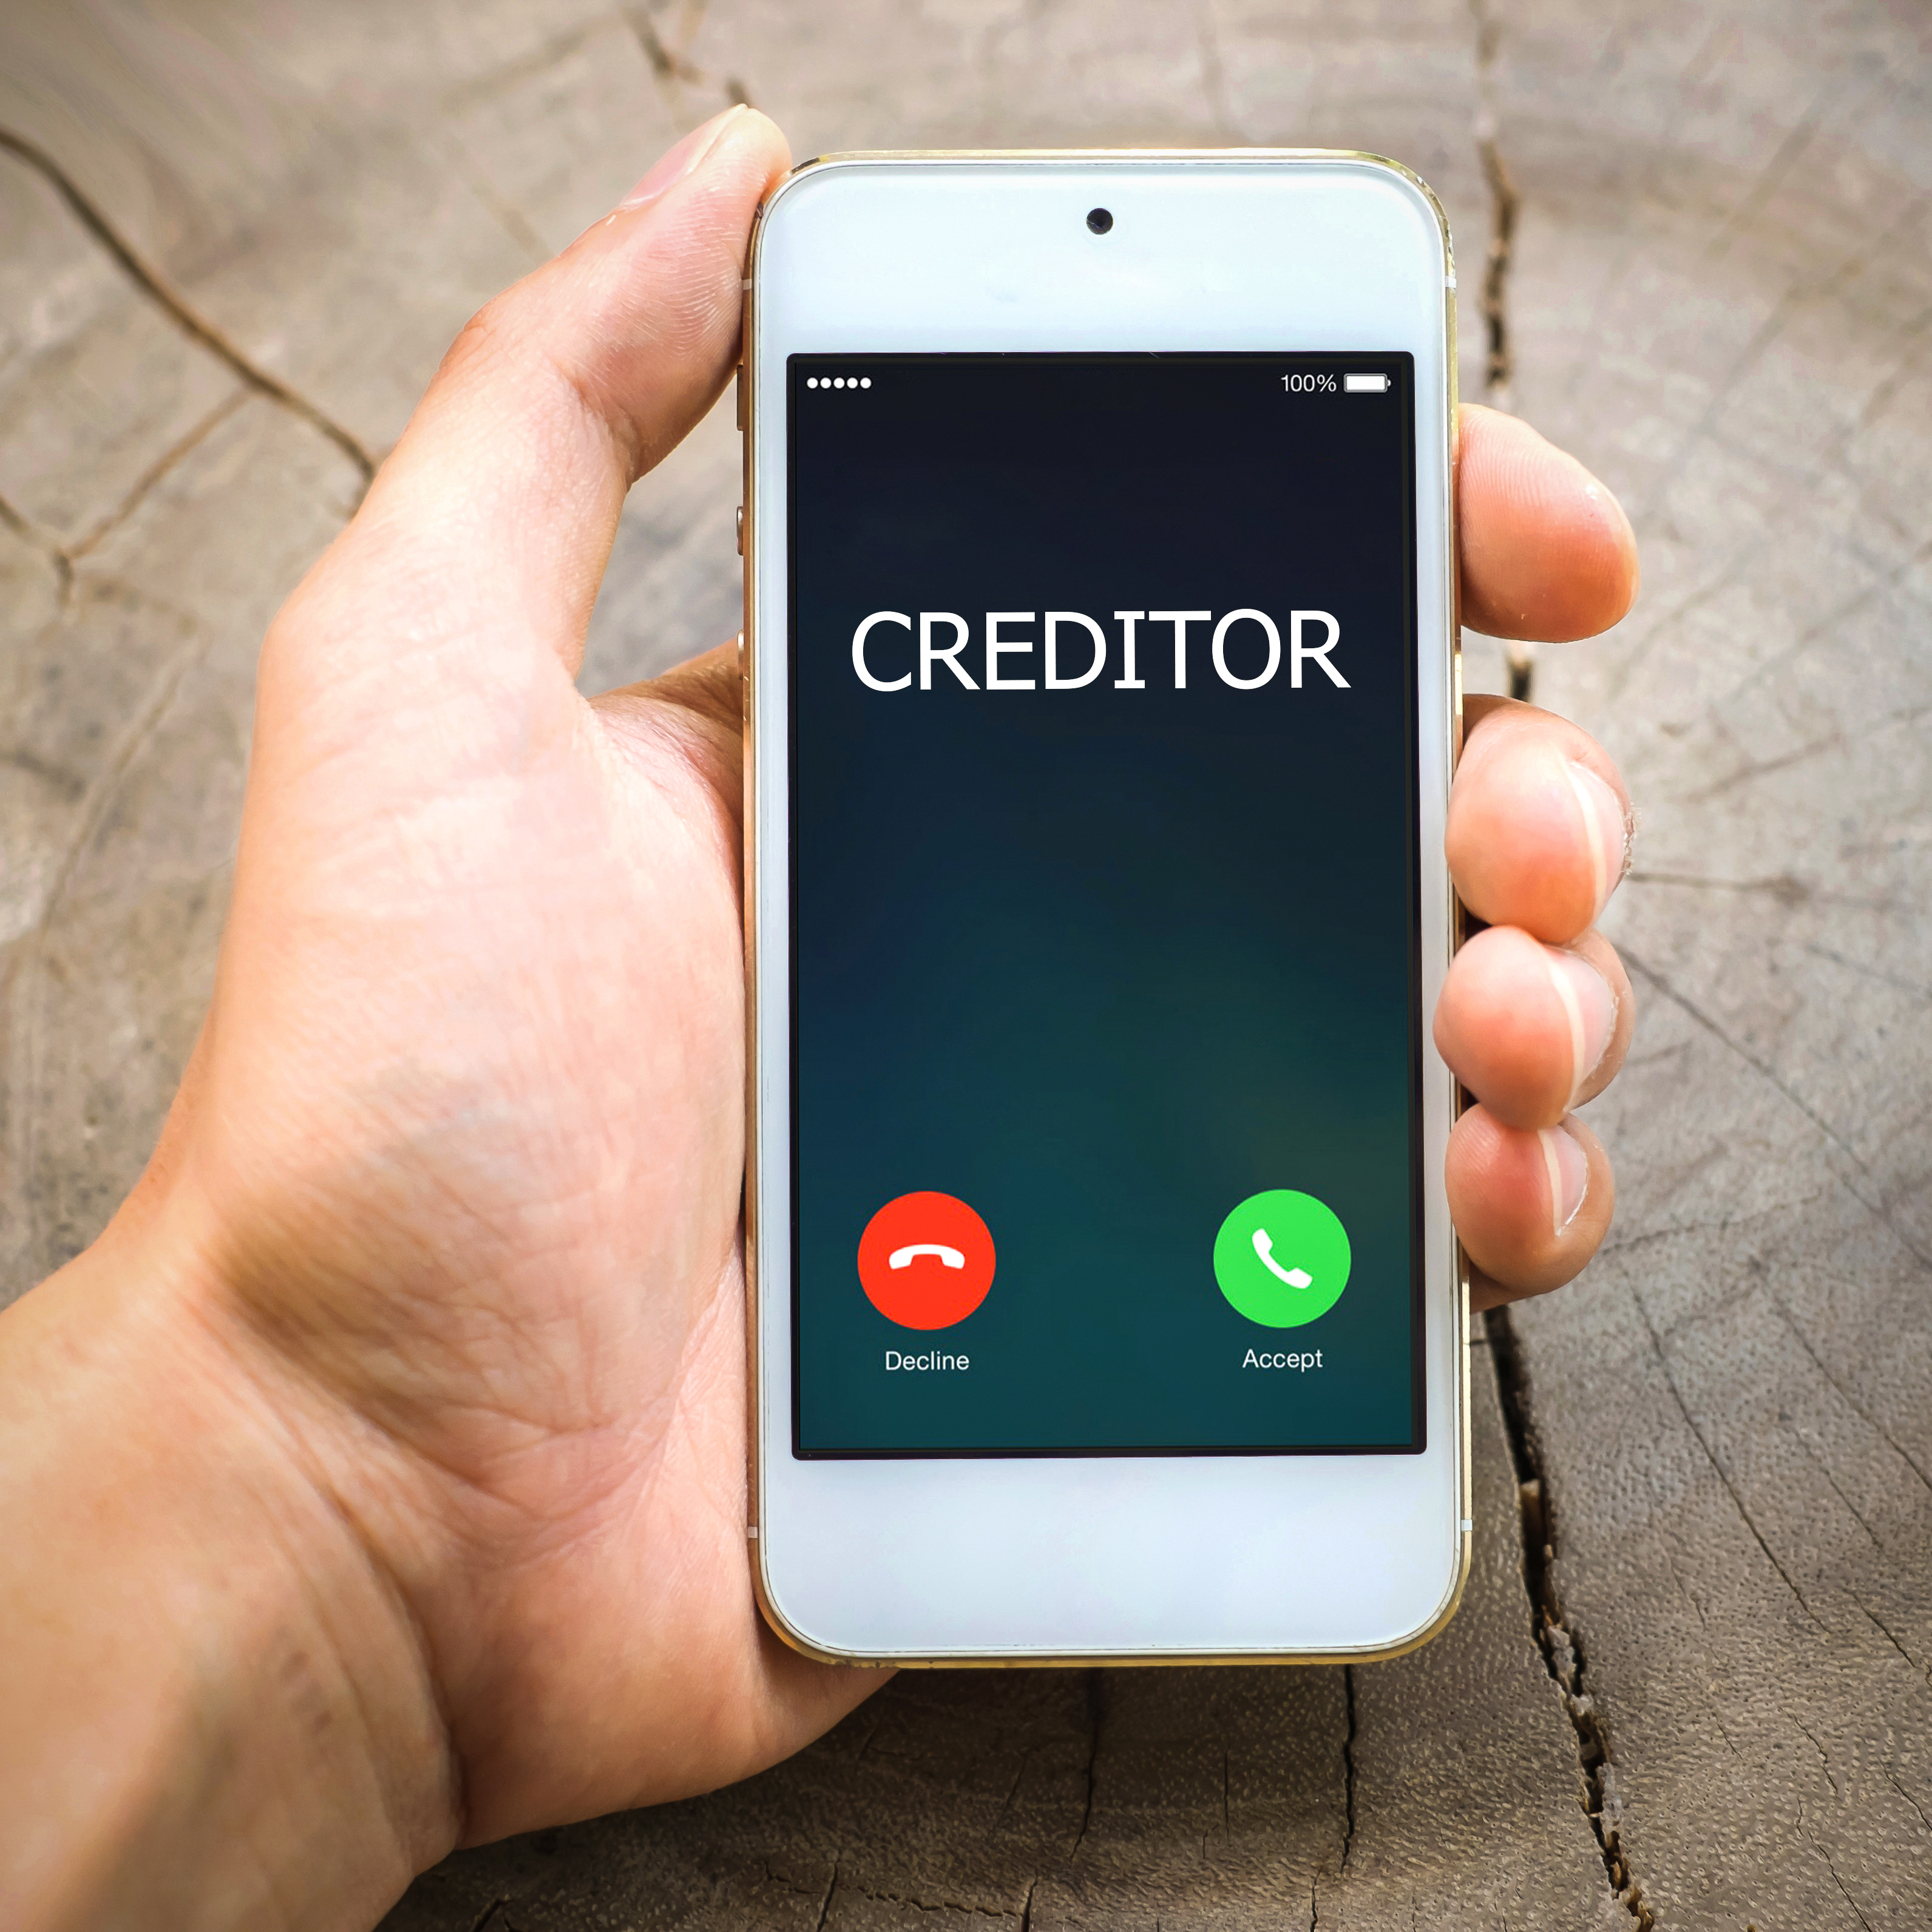 A hand holding an iPhone with the screen displaying an incoming call from a CREDITOR, representing how chapter 7 can protect you from creditors in Minnesota.